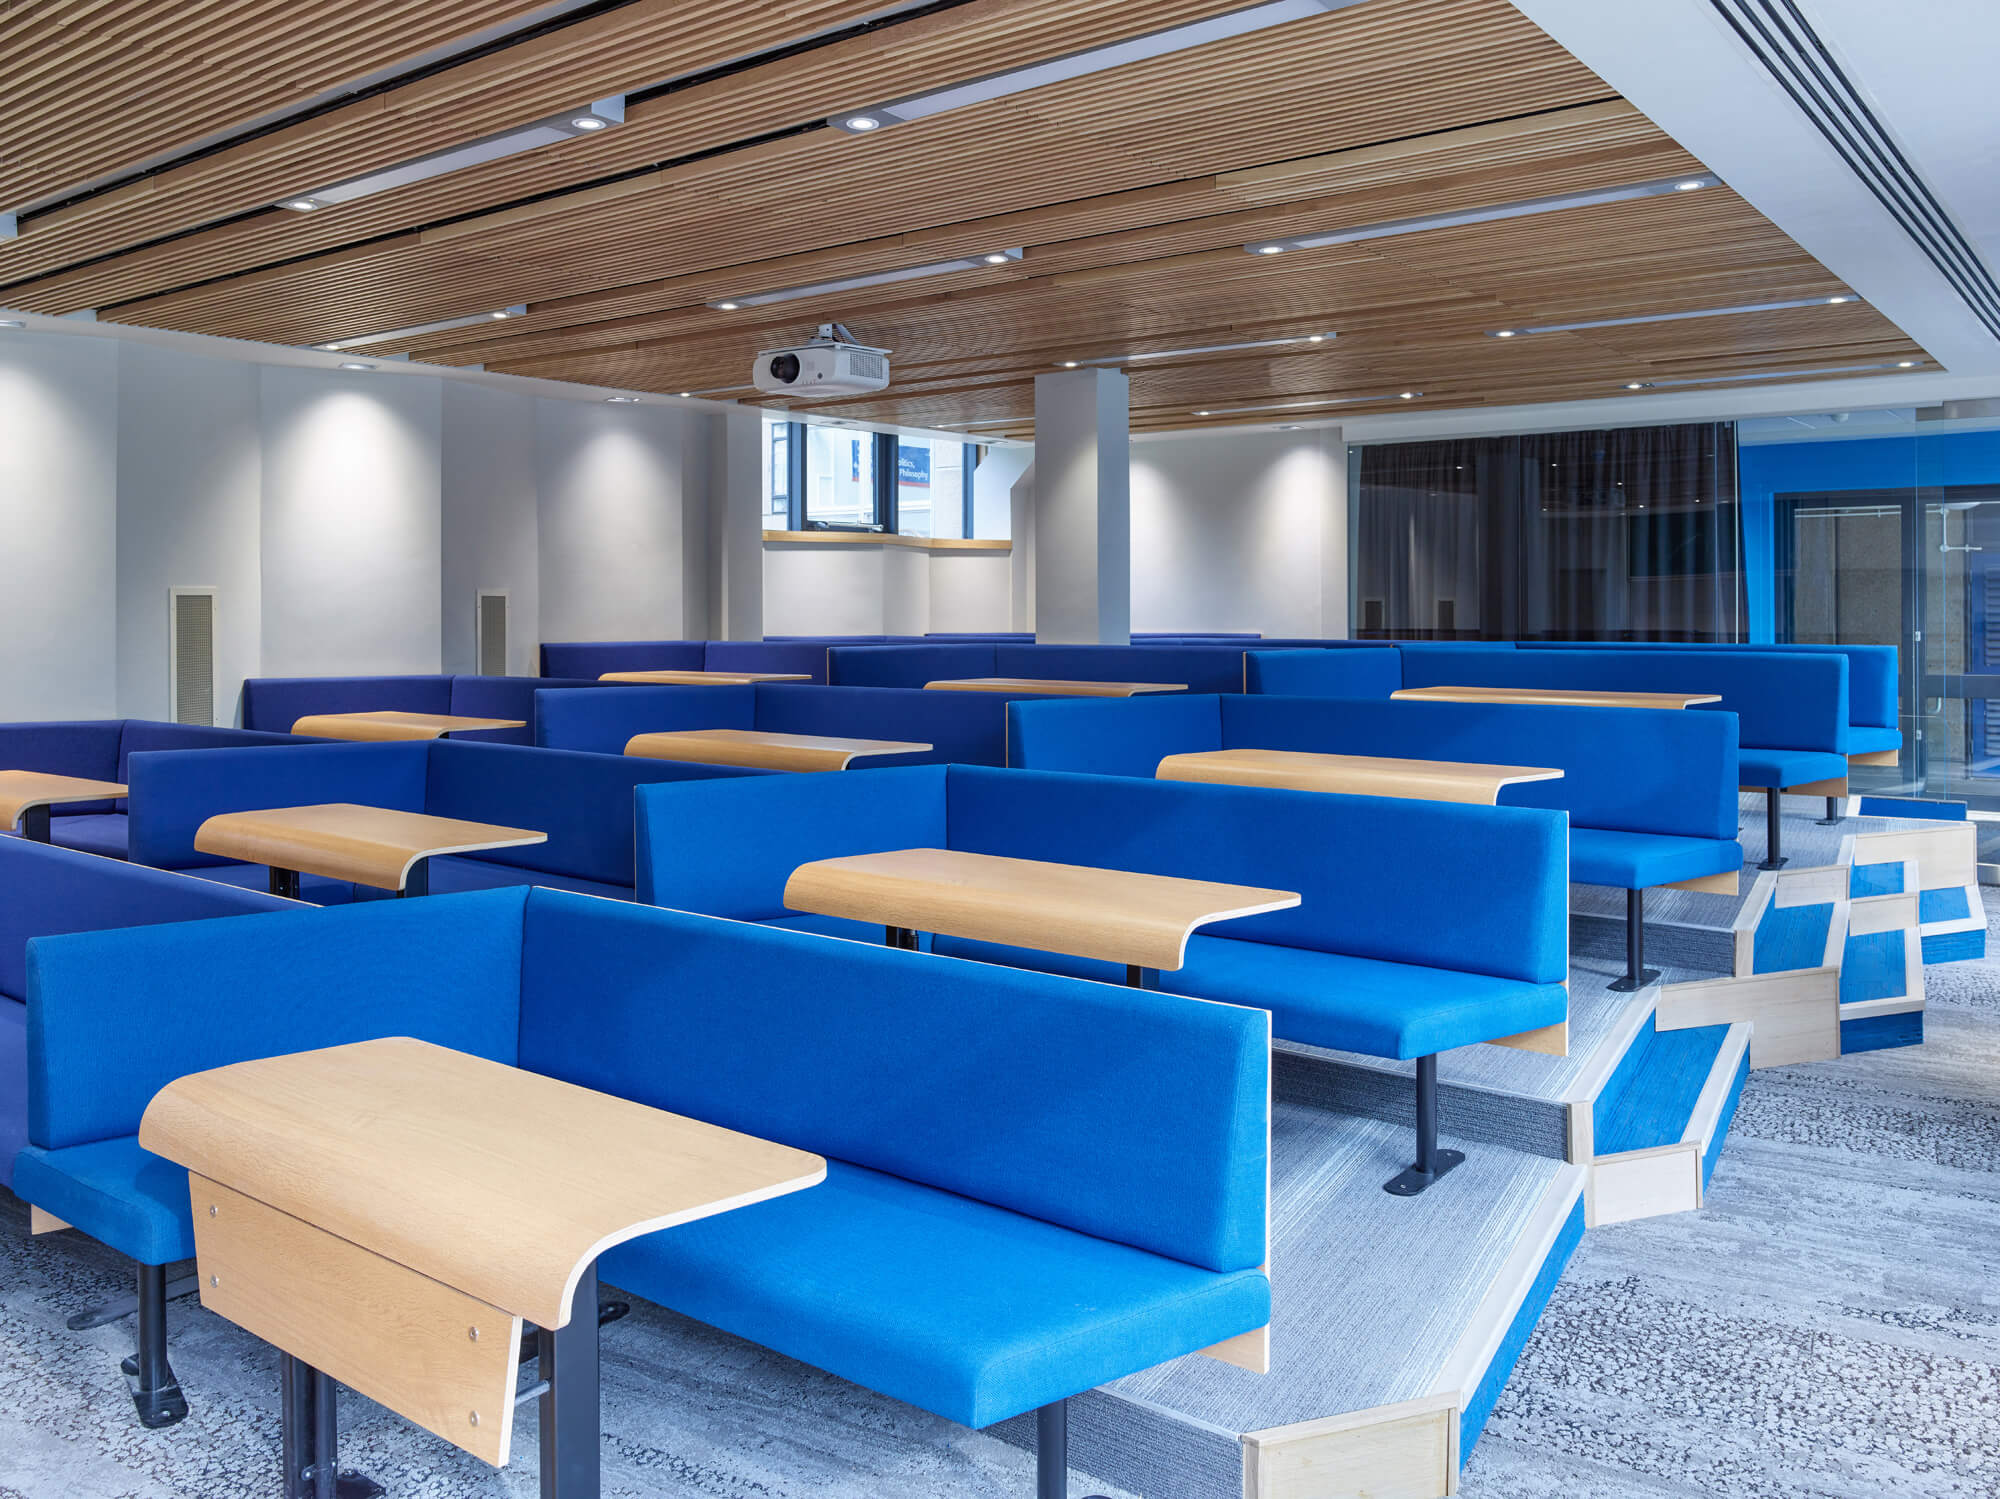 A Research University's Lecture Theatre